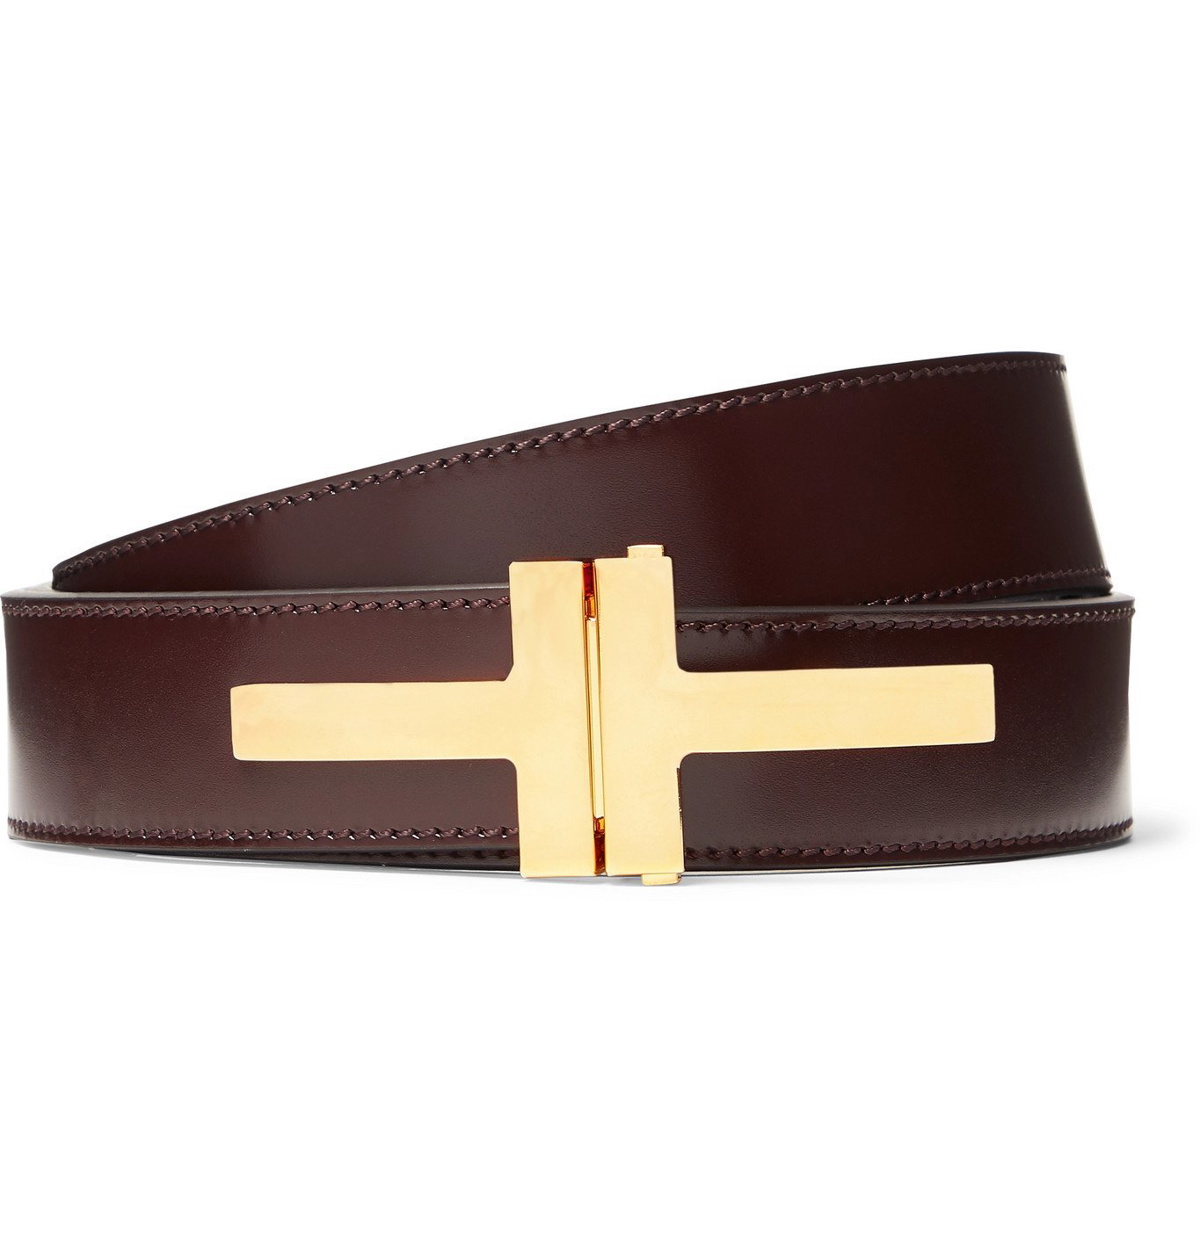 Tom Ford Lozerna Woven Leather Belt 0 31/32in Gold Buckle Iconic Brown New  100